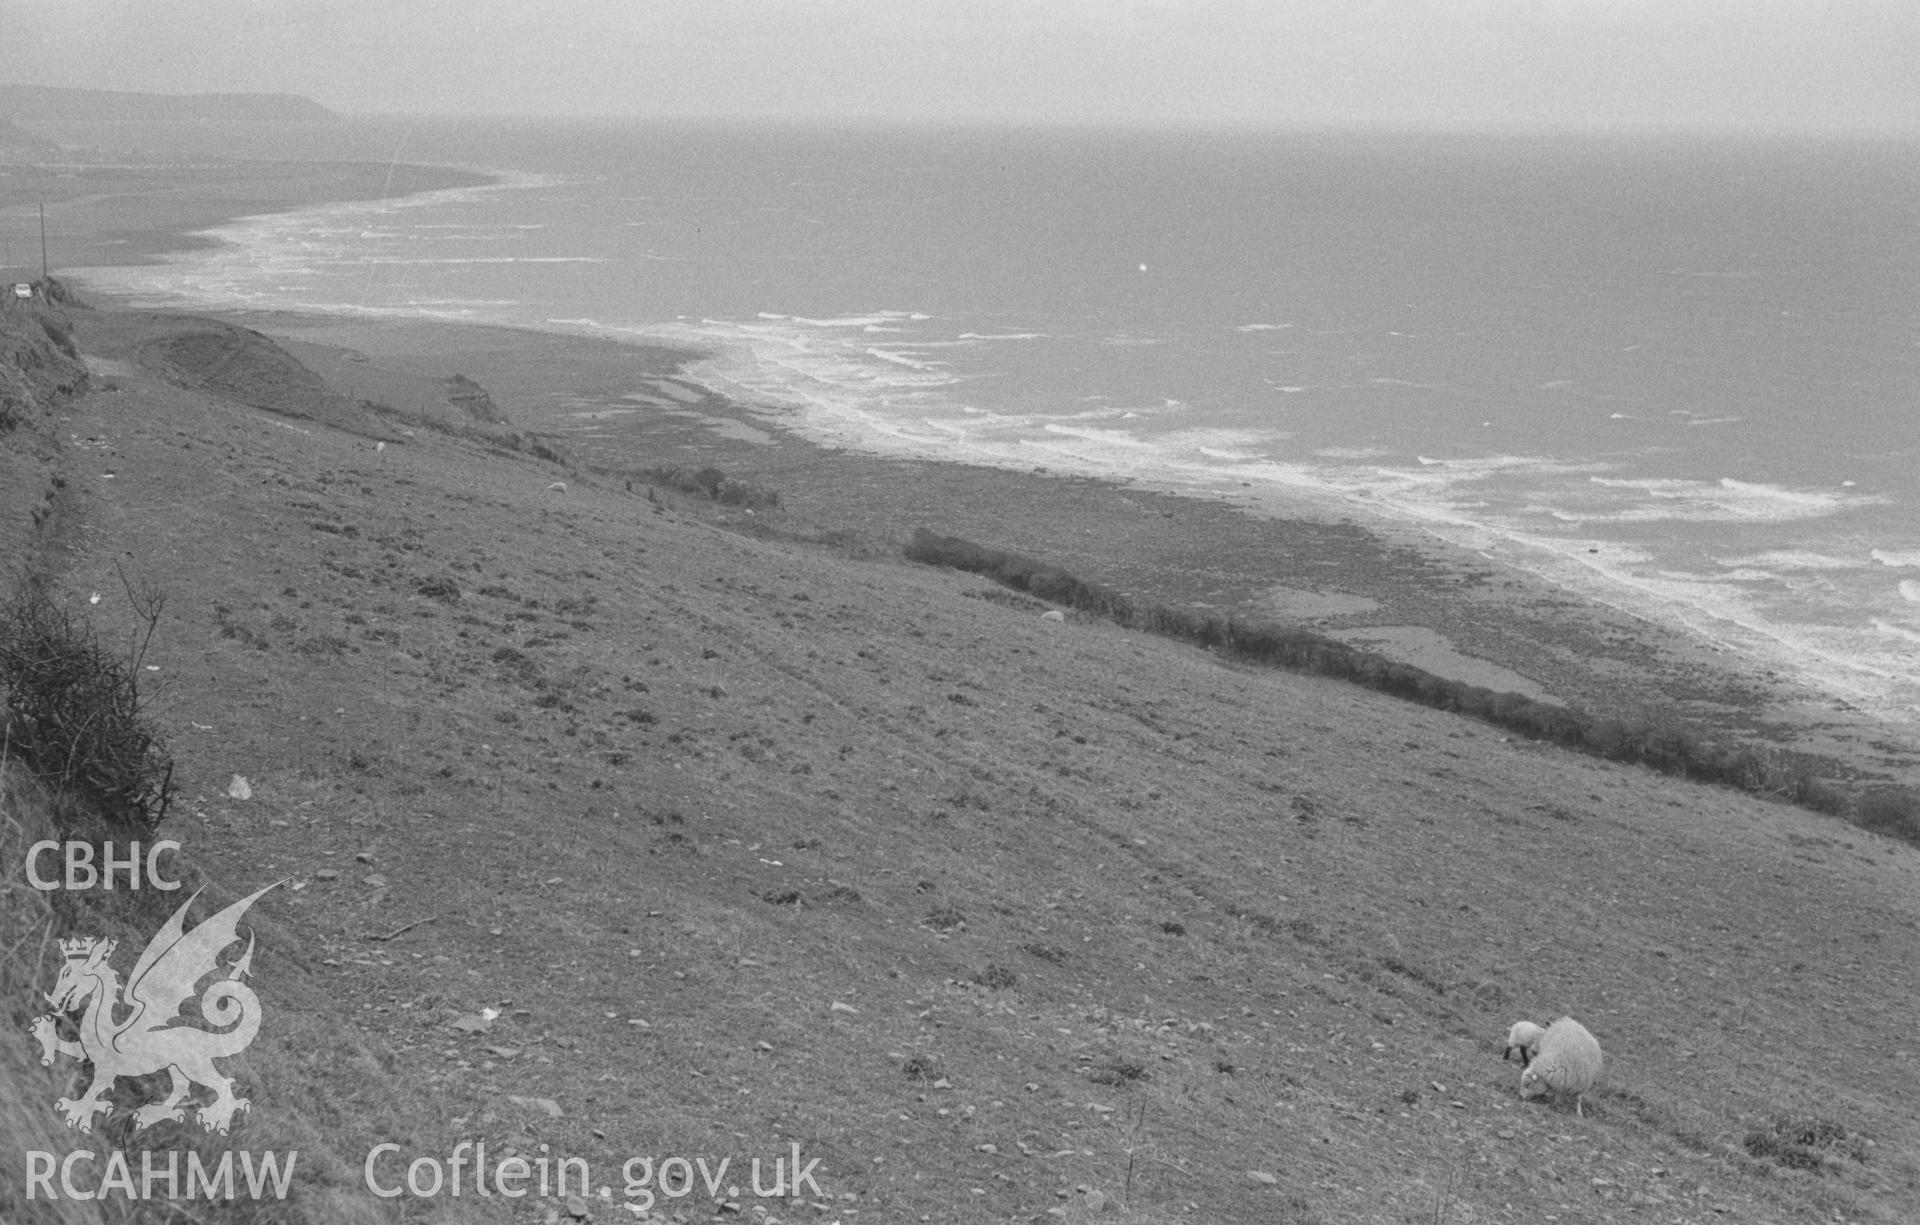 Digital copy of black & white negative showing view looking from A487 main road 0.5km north east of Aberarth, showing Aberarth fish traps on shore at low tide. Photographed by Arthur O. Chater in April 1966 from Grid Reference SN 485 643, looking west.